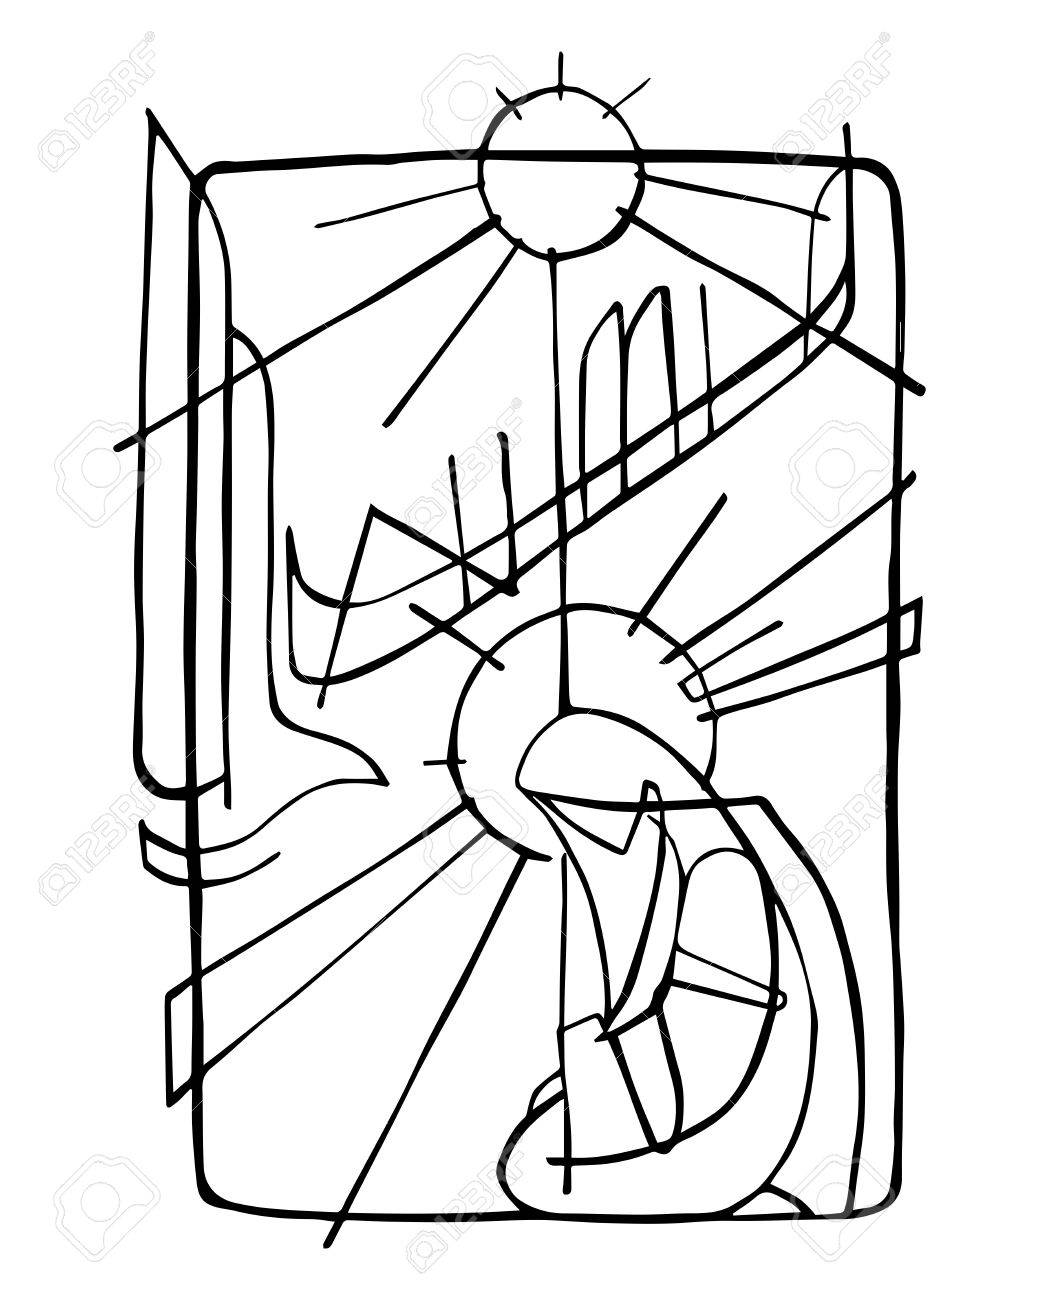 82949687-hand-drawn-vector-illustration-or-drawing-of-virgin-mary-and-holy-spirit-at-the-incarnation.jpg